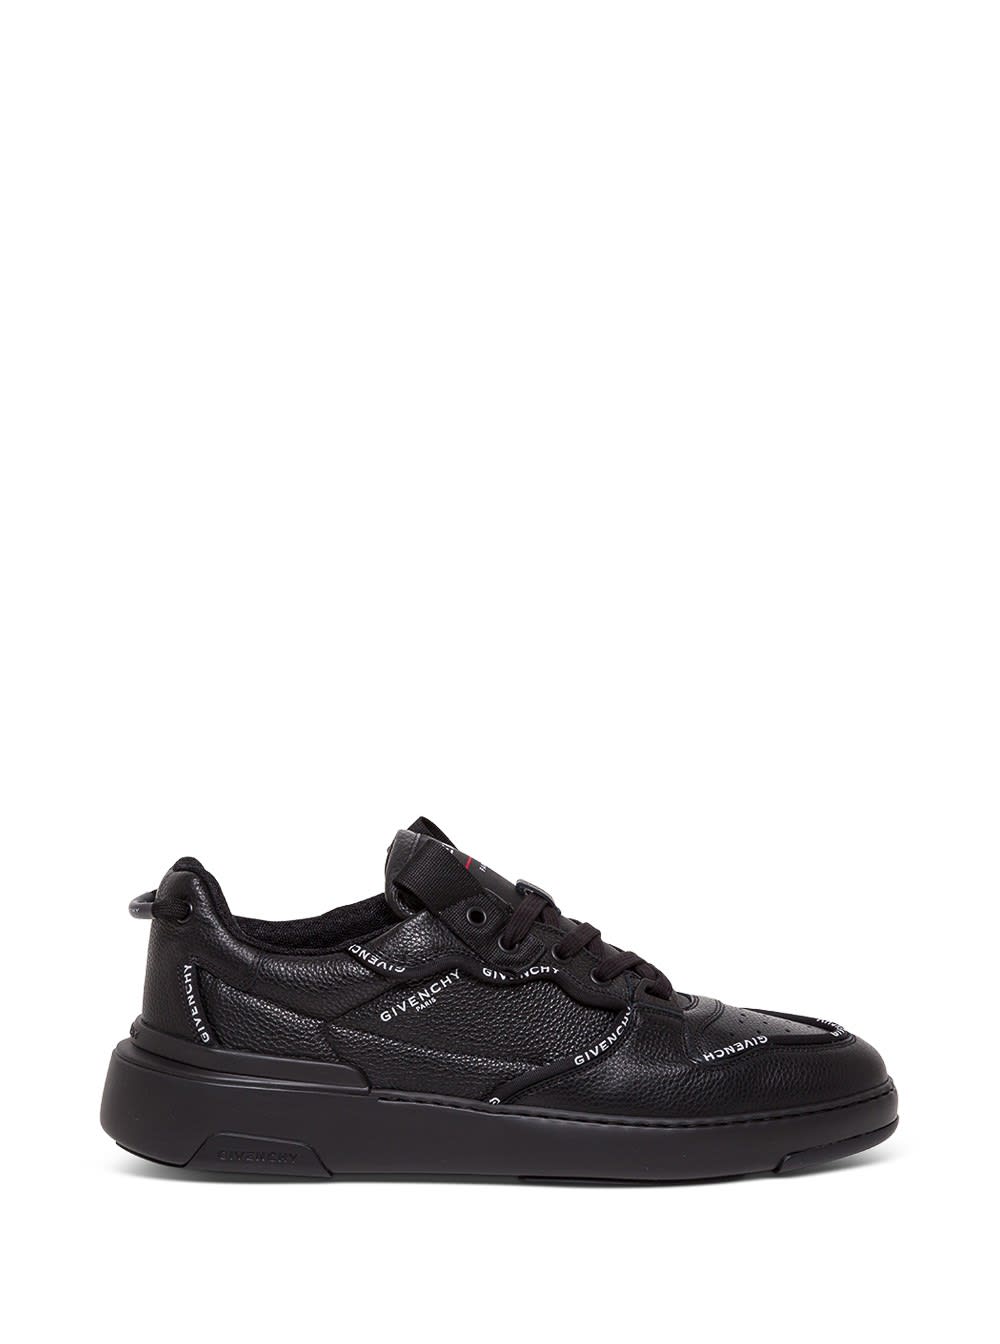 Givenchy Black Leather Sneakers With Contrasting Logo